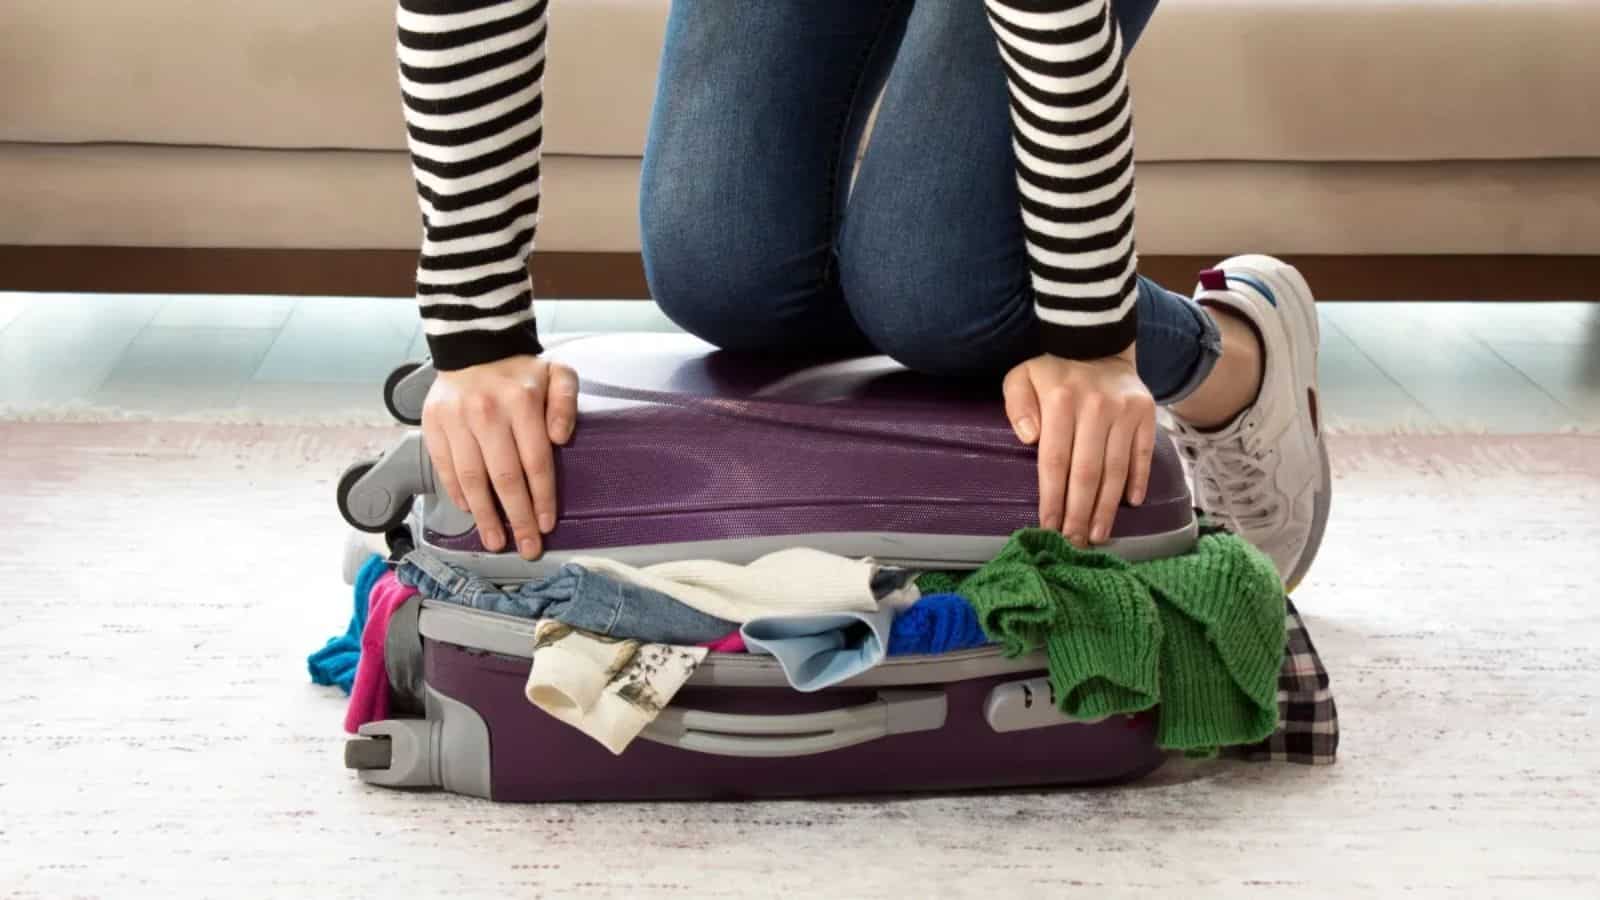 <p><span>While it may seem convenient, overpacking your carry-on luggage can cause major headaches for TSA agents. Not only does it make it difficult for them to screen your belongings properly, but it also adds unnecessary weight and bulk when going through the screening equipment. </span></p><p><span>TSA agent Jessica, who works at John F. Kennedy International Airport in New York, advises travelers to </span><a href="https://savvyolu.com/great-travel-hacks-to-make-traveling-a-breeze/"><span>pack smartly</span></a><span>. It’s essential to follow the 3-1-1 rule and not overpack your luggage.</span></p>